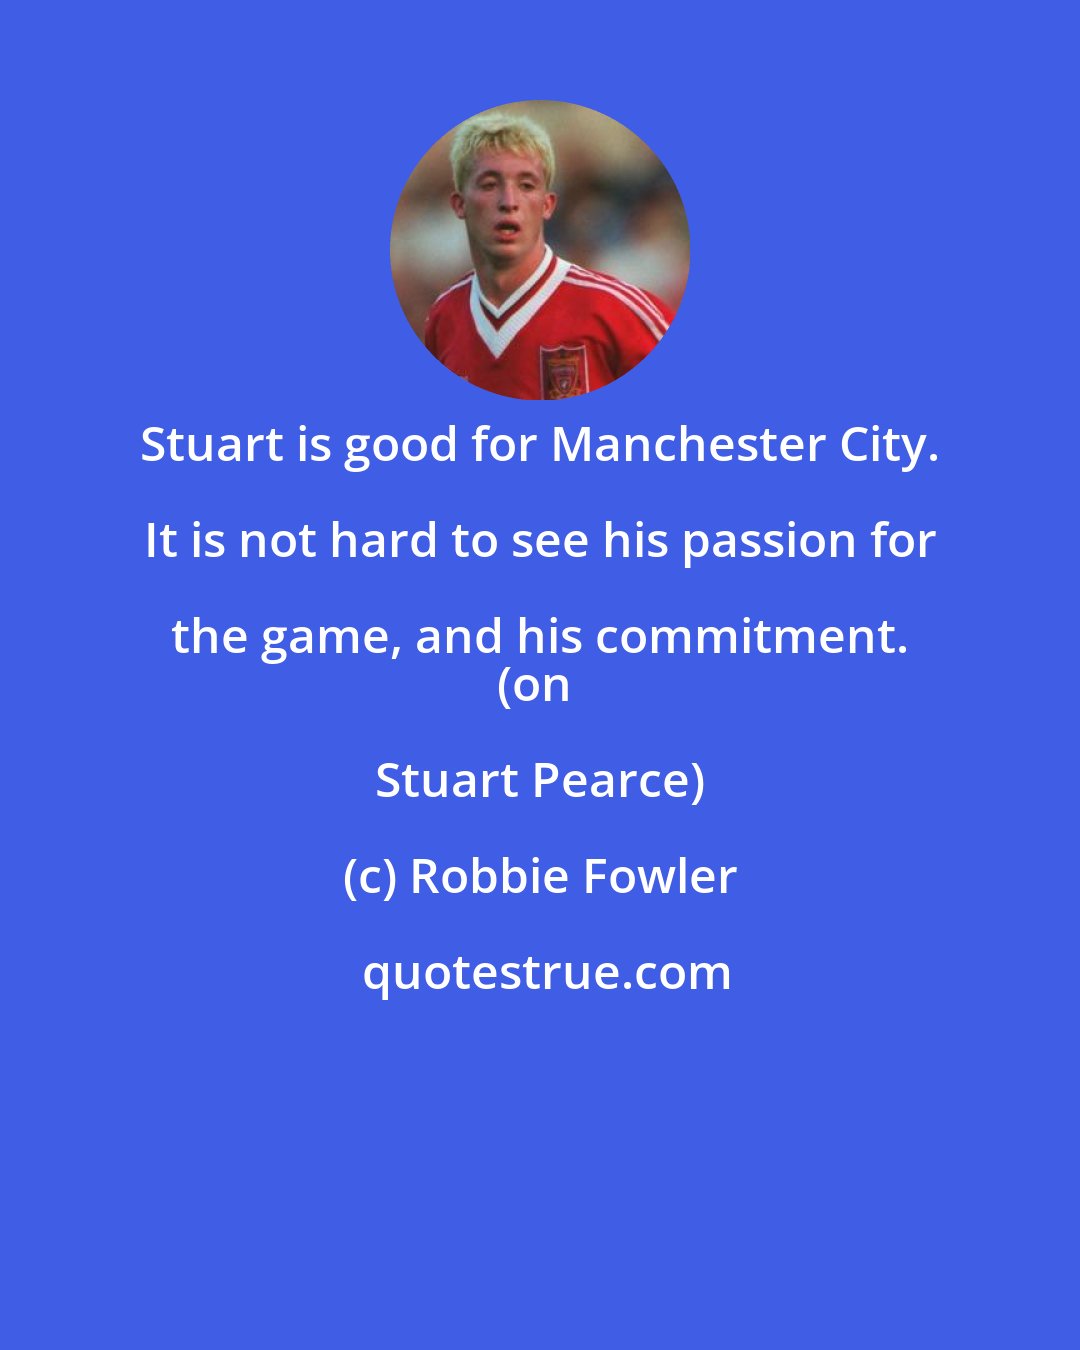 Robbie Fowler: Stuart is good for Manchester City. It is not hard to see his passion for the game, and his commitment. 
(on Stuart Pearce)